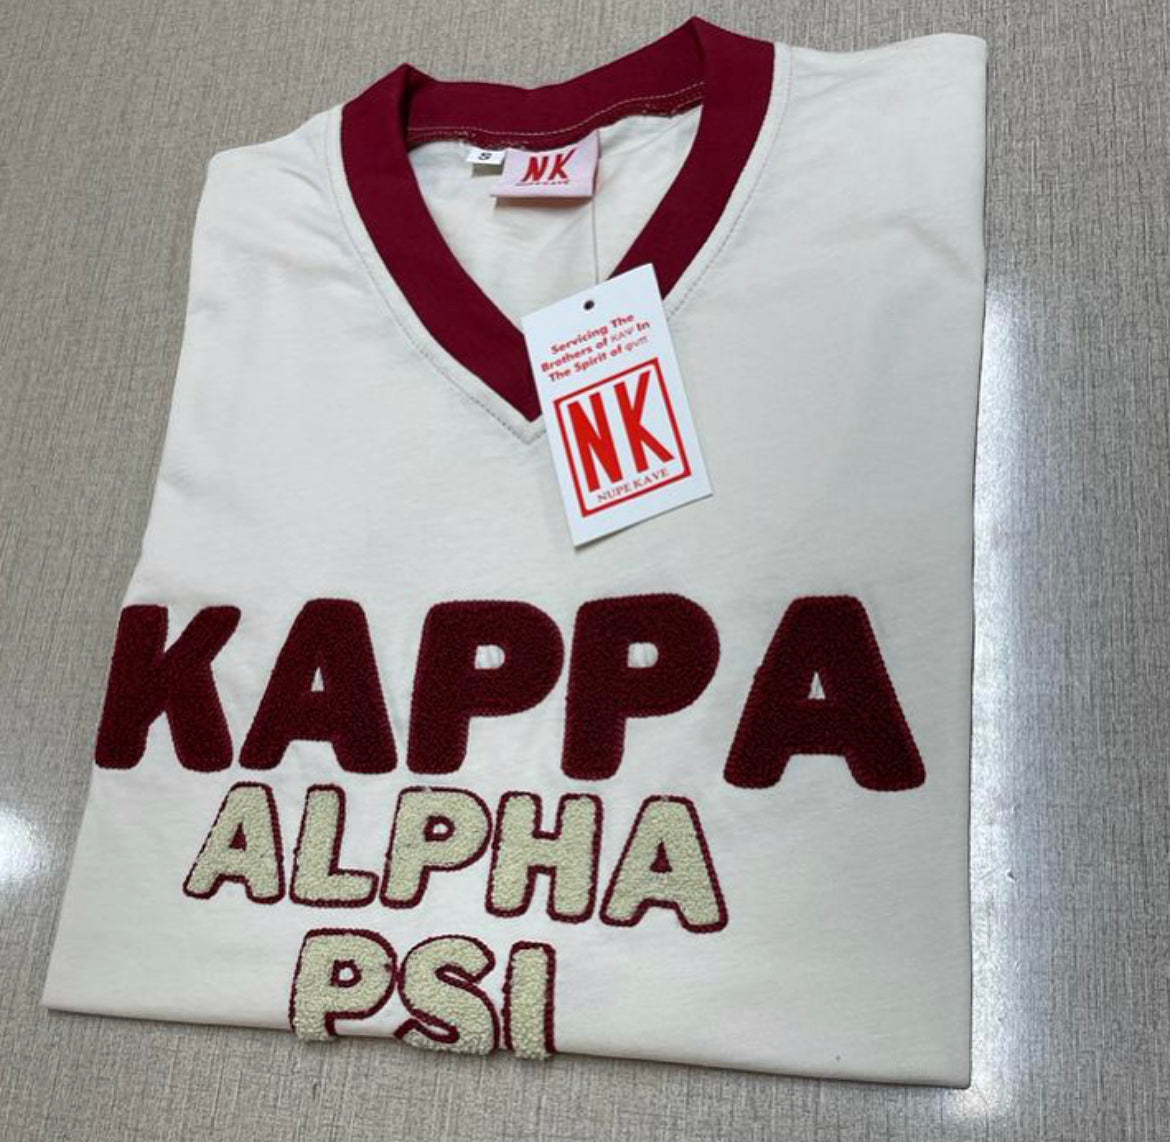 Exclusive Kappa Alpha Psi Double Chenille Lettered T-shirt . This is the perfect short-sleeved shirt to wear while showing off your Kappa Alpha Psi fraternity lettering. A comfortable 100% cotton tee with a twill Greek letters embroidery across the chest give you the perfect fit. This shirt is also a perfect gift for your favorite Kappa Man.